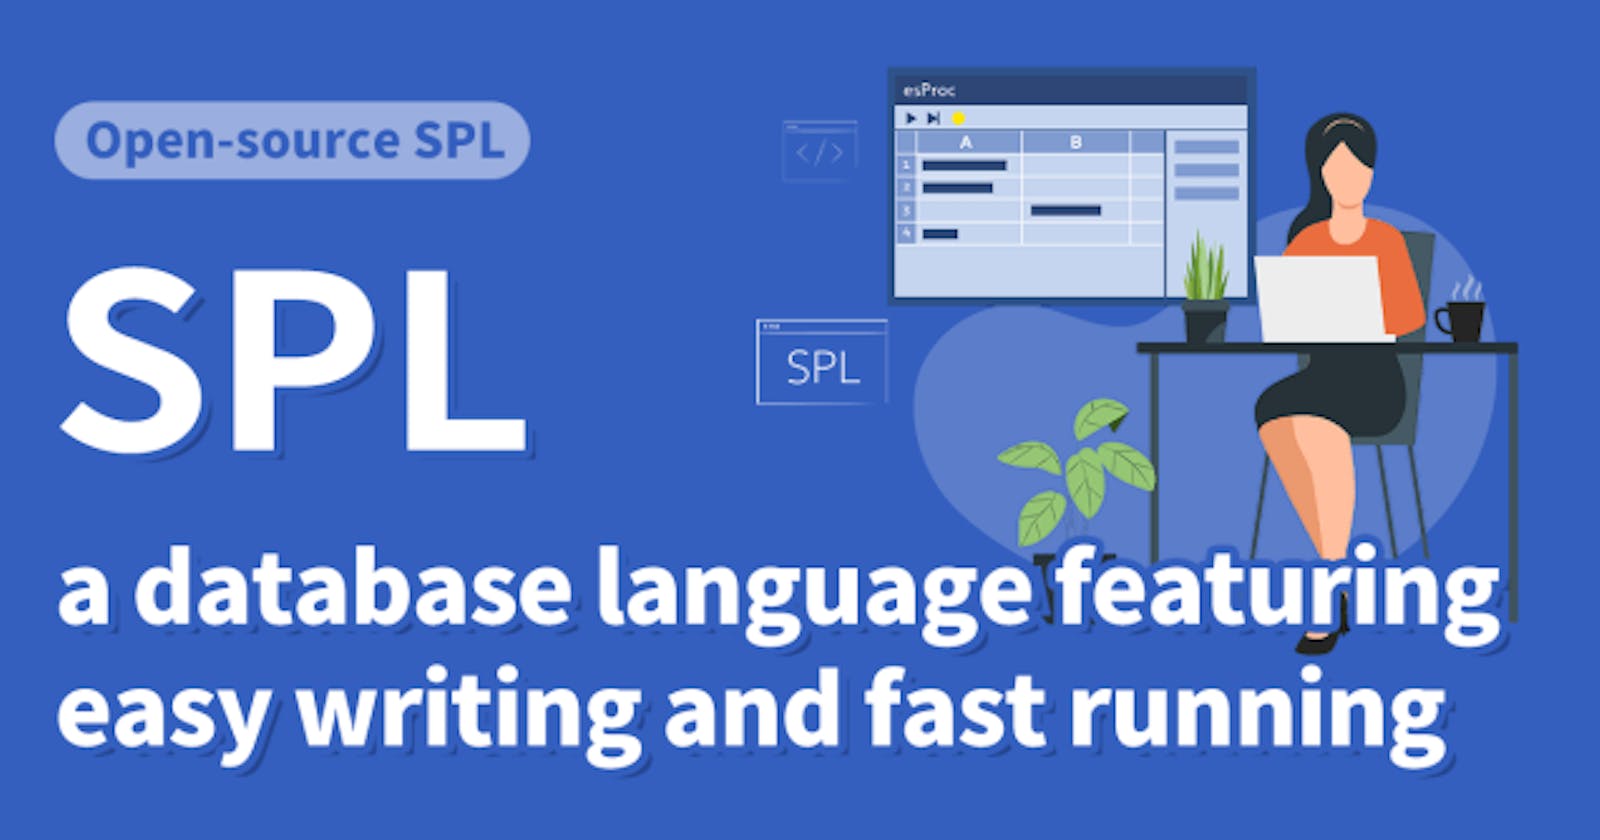 SPL: a database language featuring easy writing and fast running